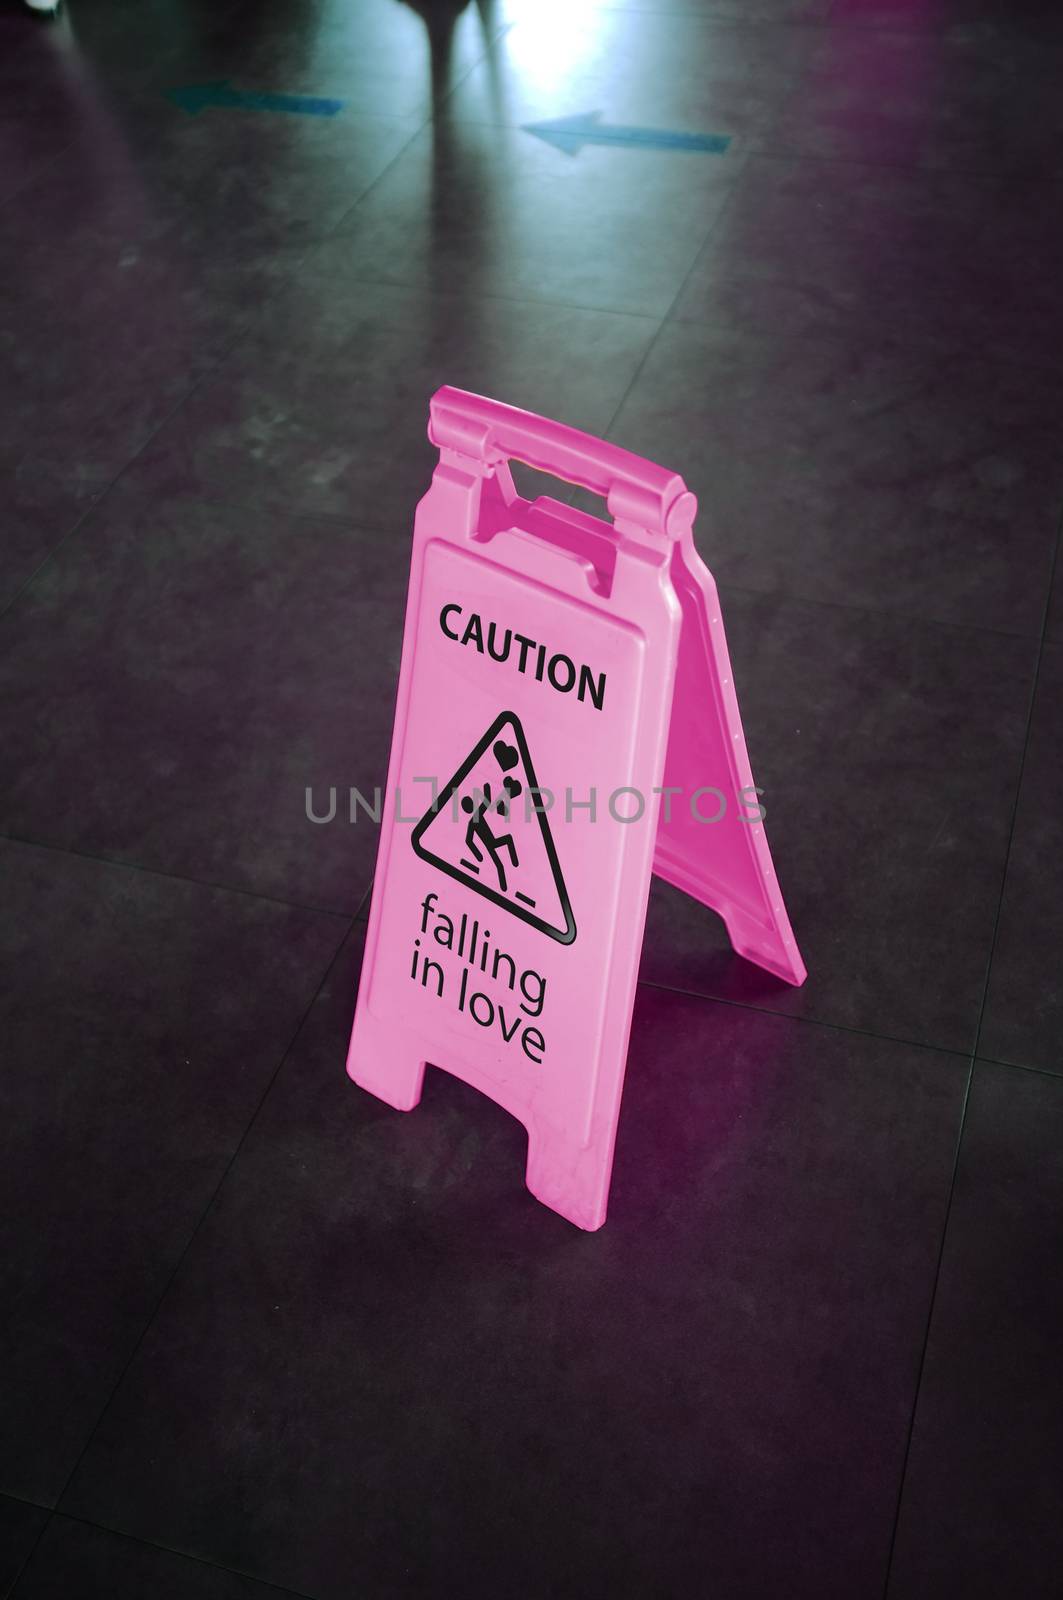 Caution pink sign for warning, falling in love